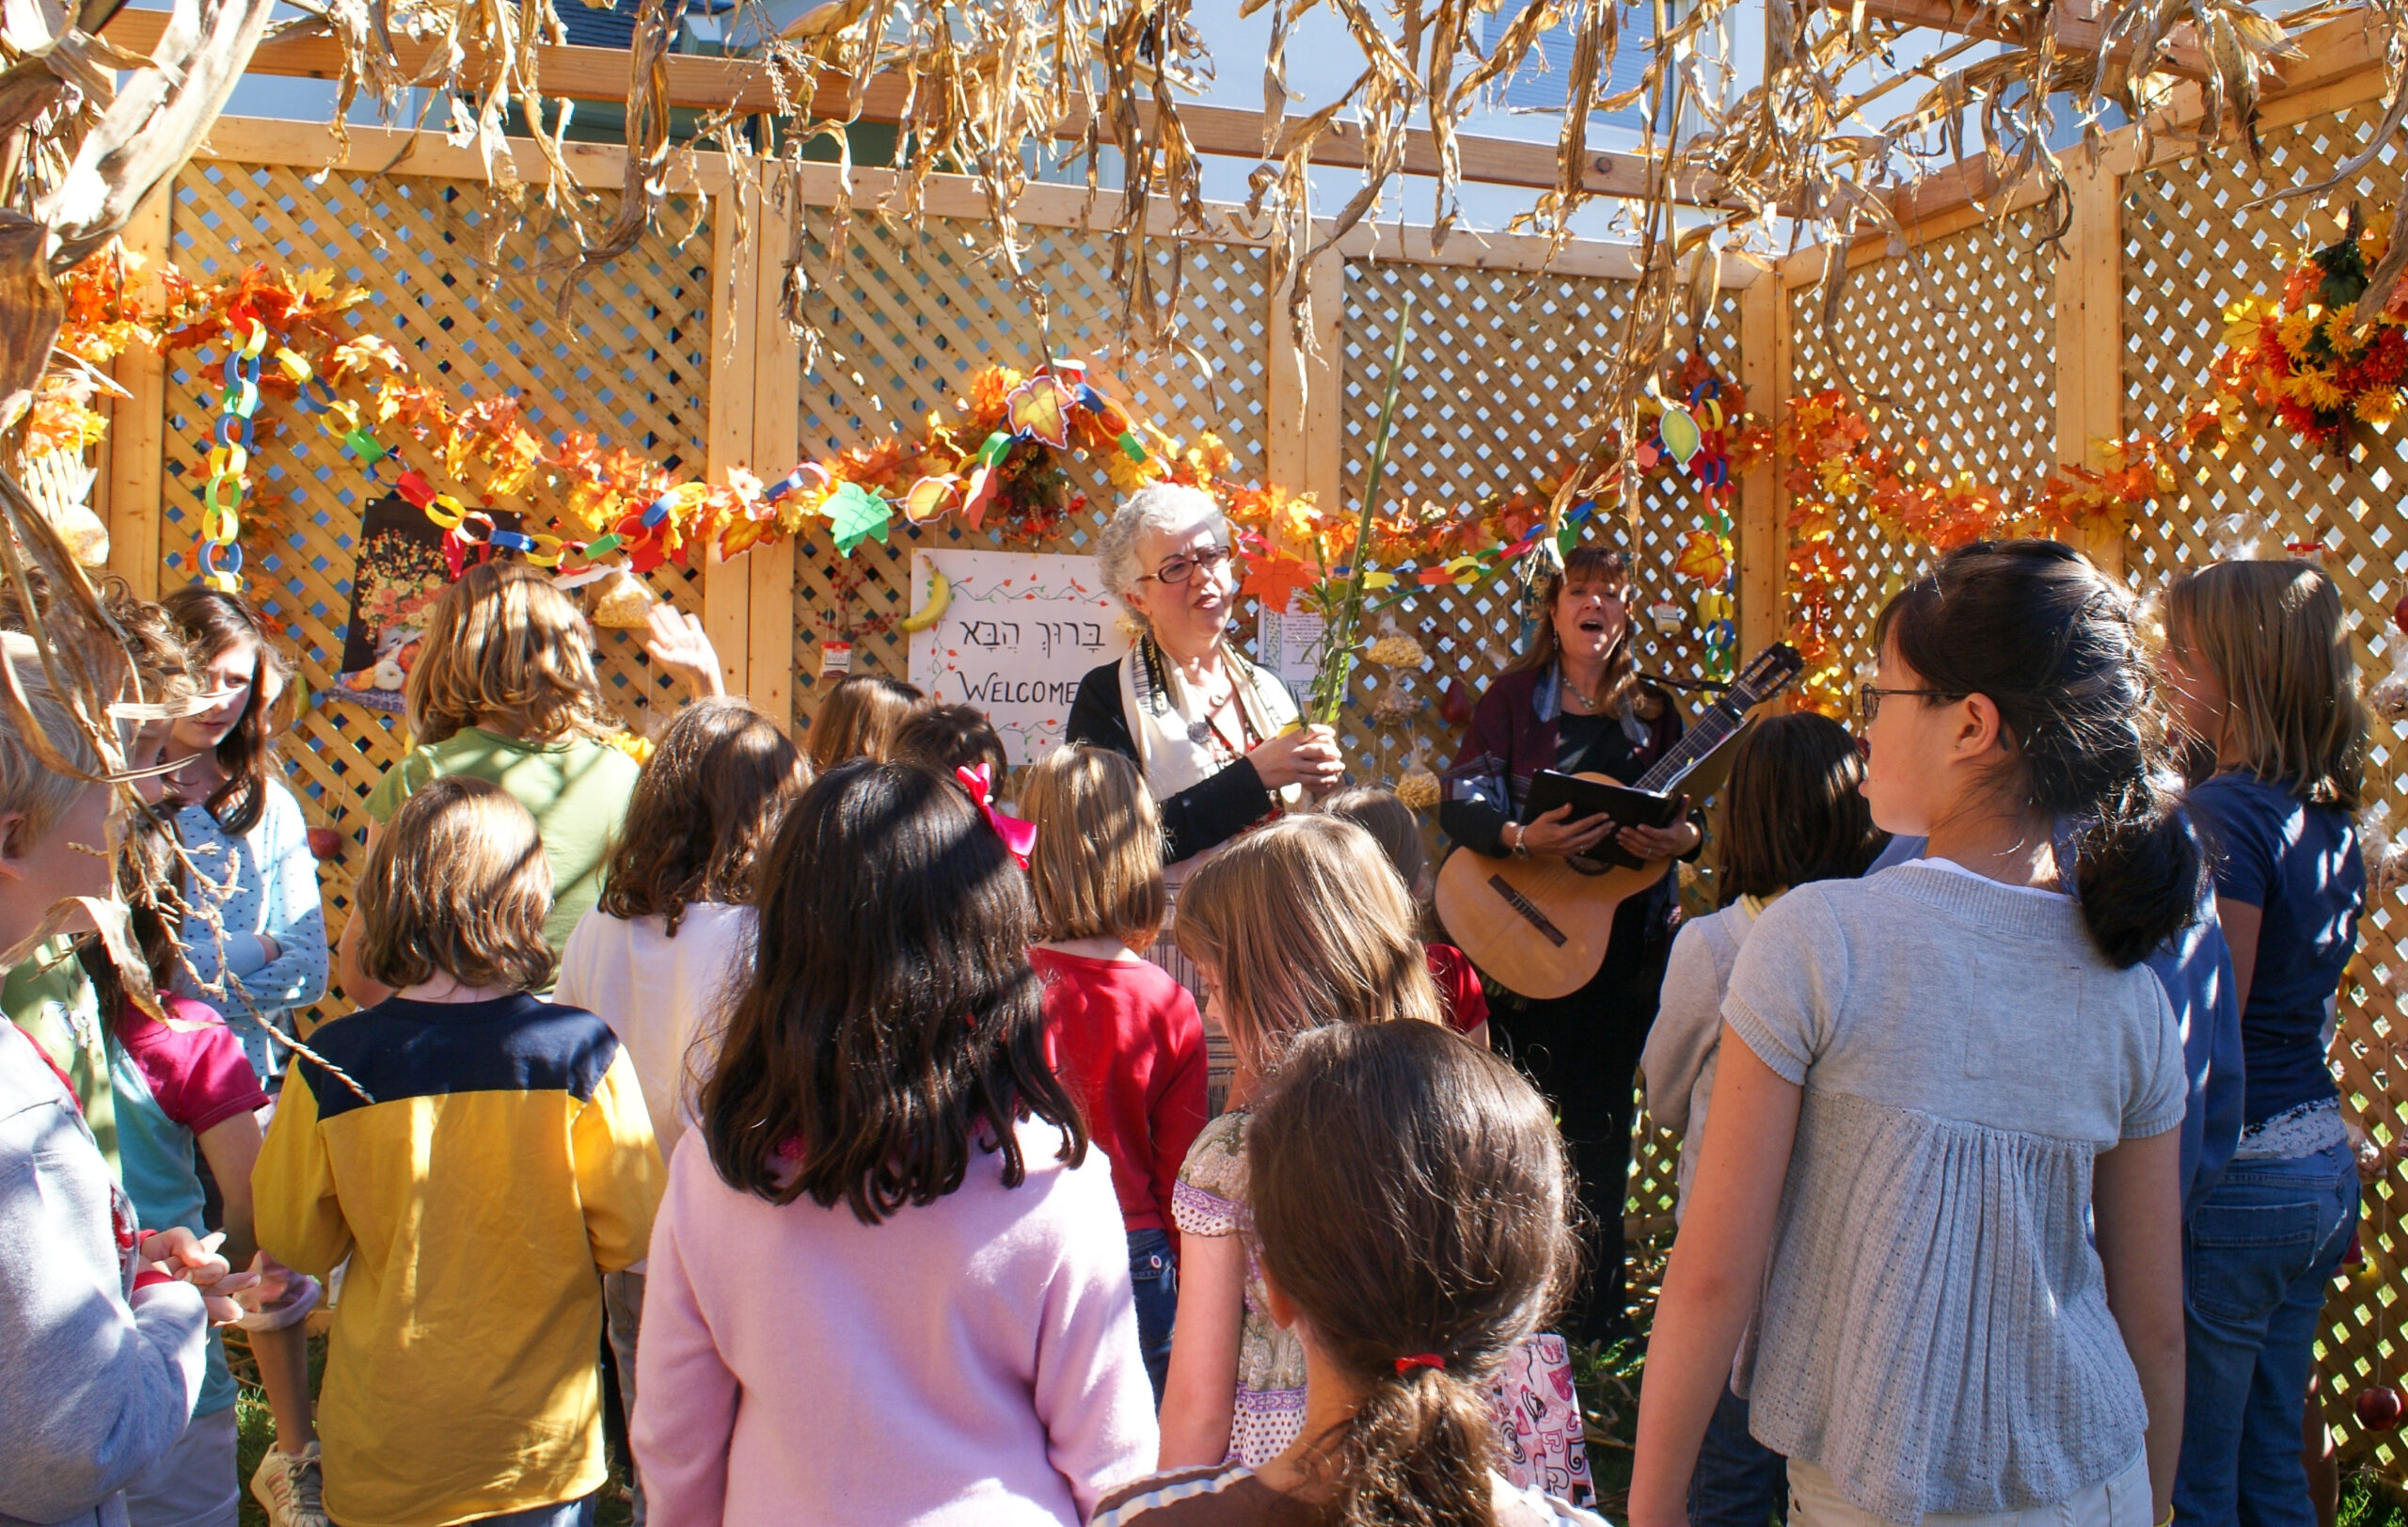 In the Sukkah